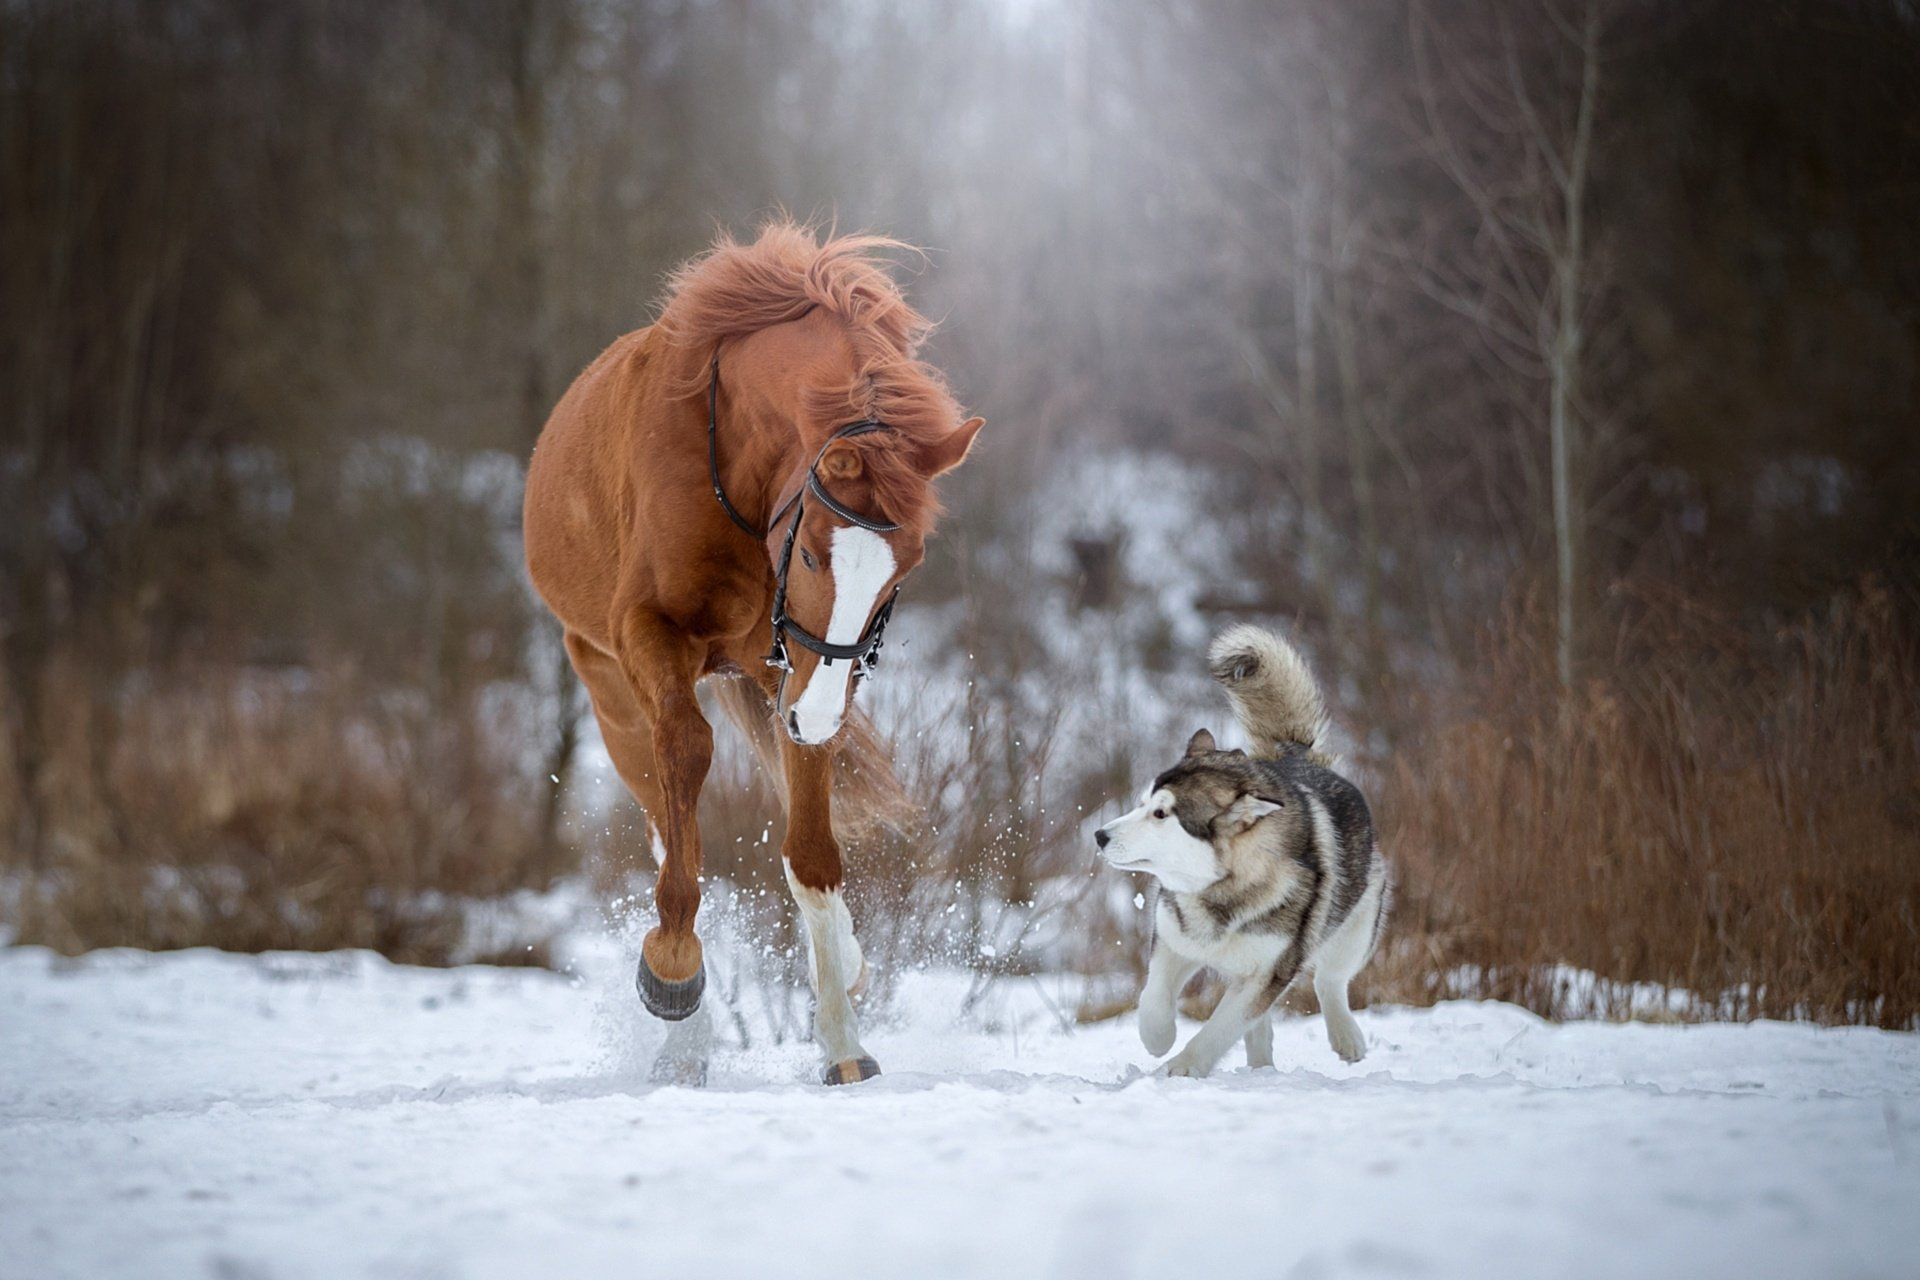 Horses And Dogs Wallpapers - Wallpaper Cave